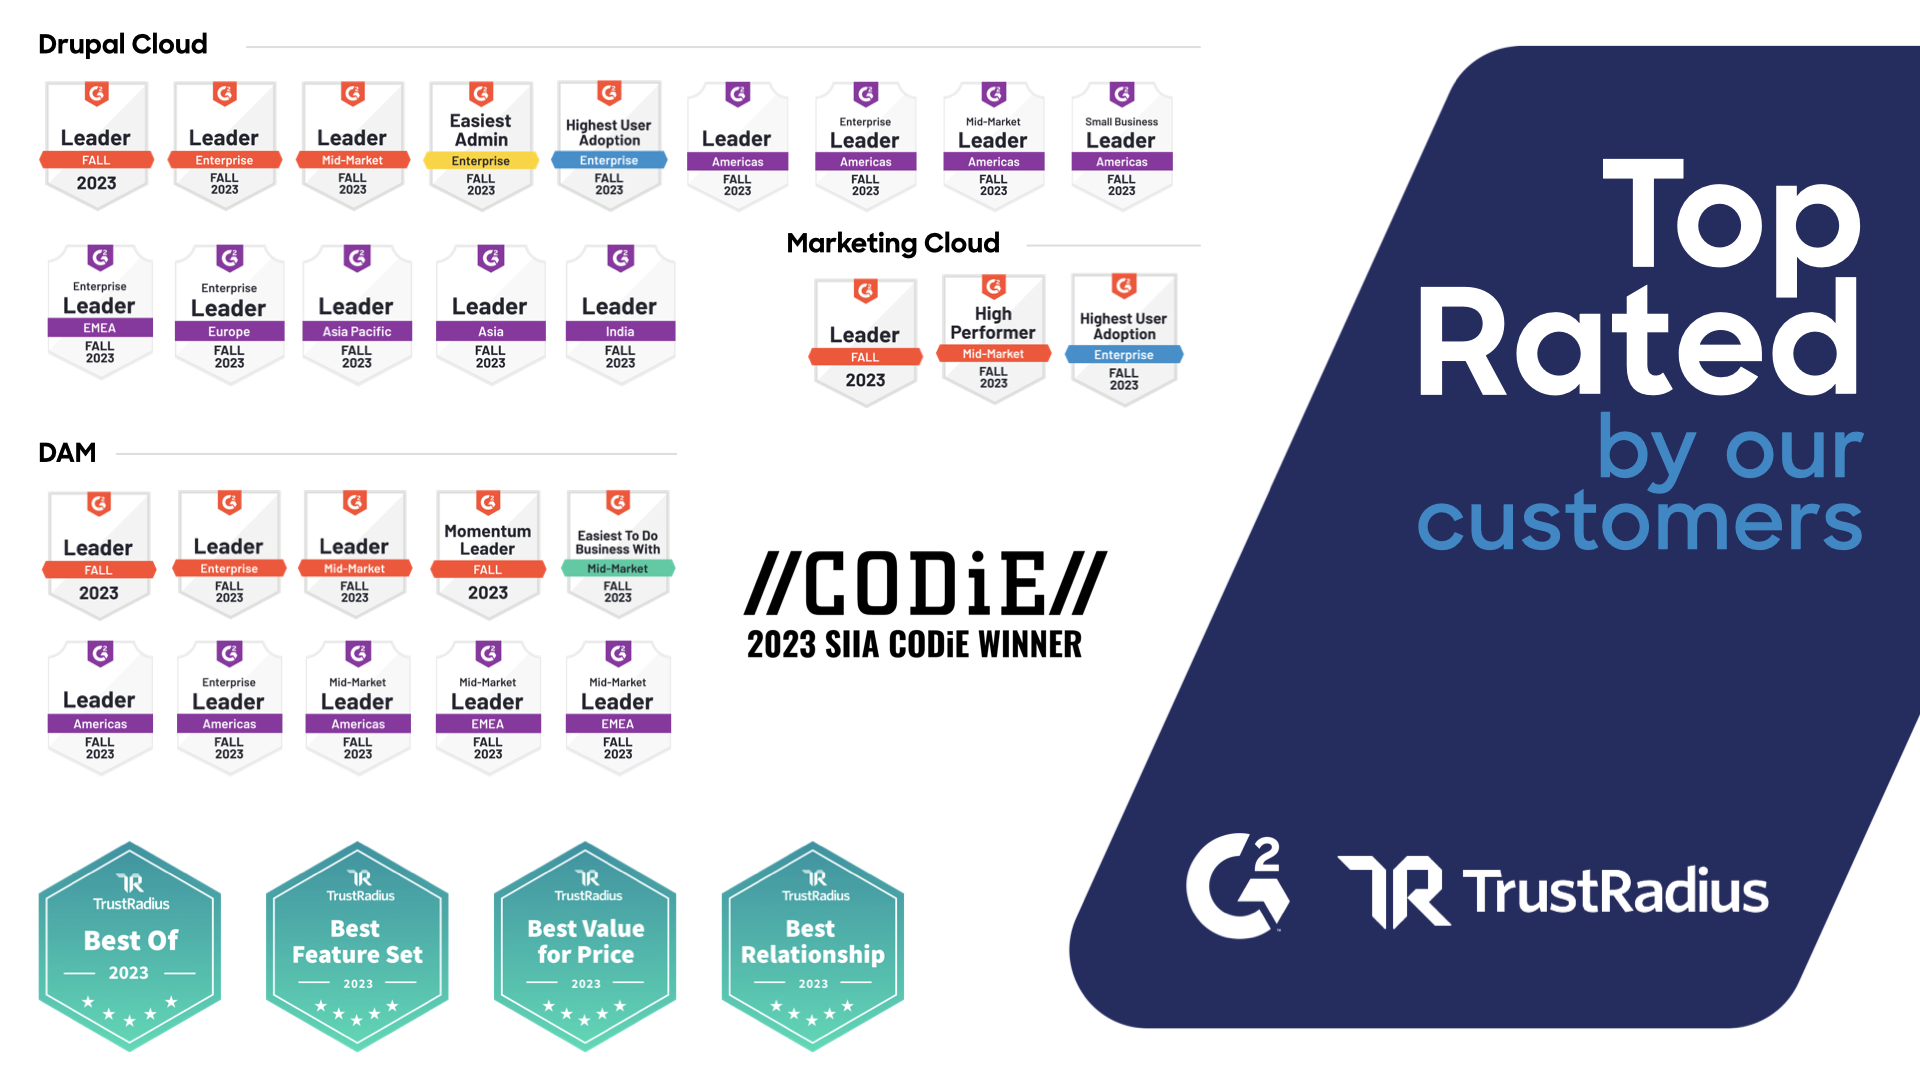 A list of 32 awards across various products for 2023, including 'Leader' and 'High Performer' from G2, 'Best Of,' 'Best Feature Set,' 'Best Value for Price,' and 'Best Relationship' from TrustRadius, and the '2023 SIIA CODiE Winner' recognition, all highlighting top customer ratings.